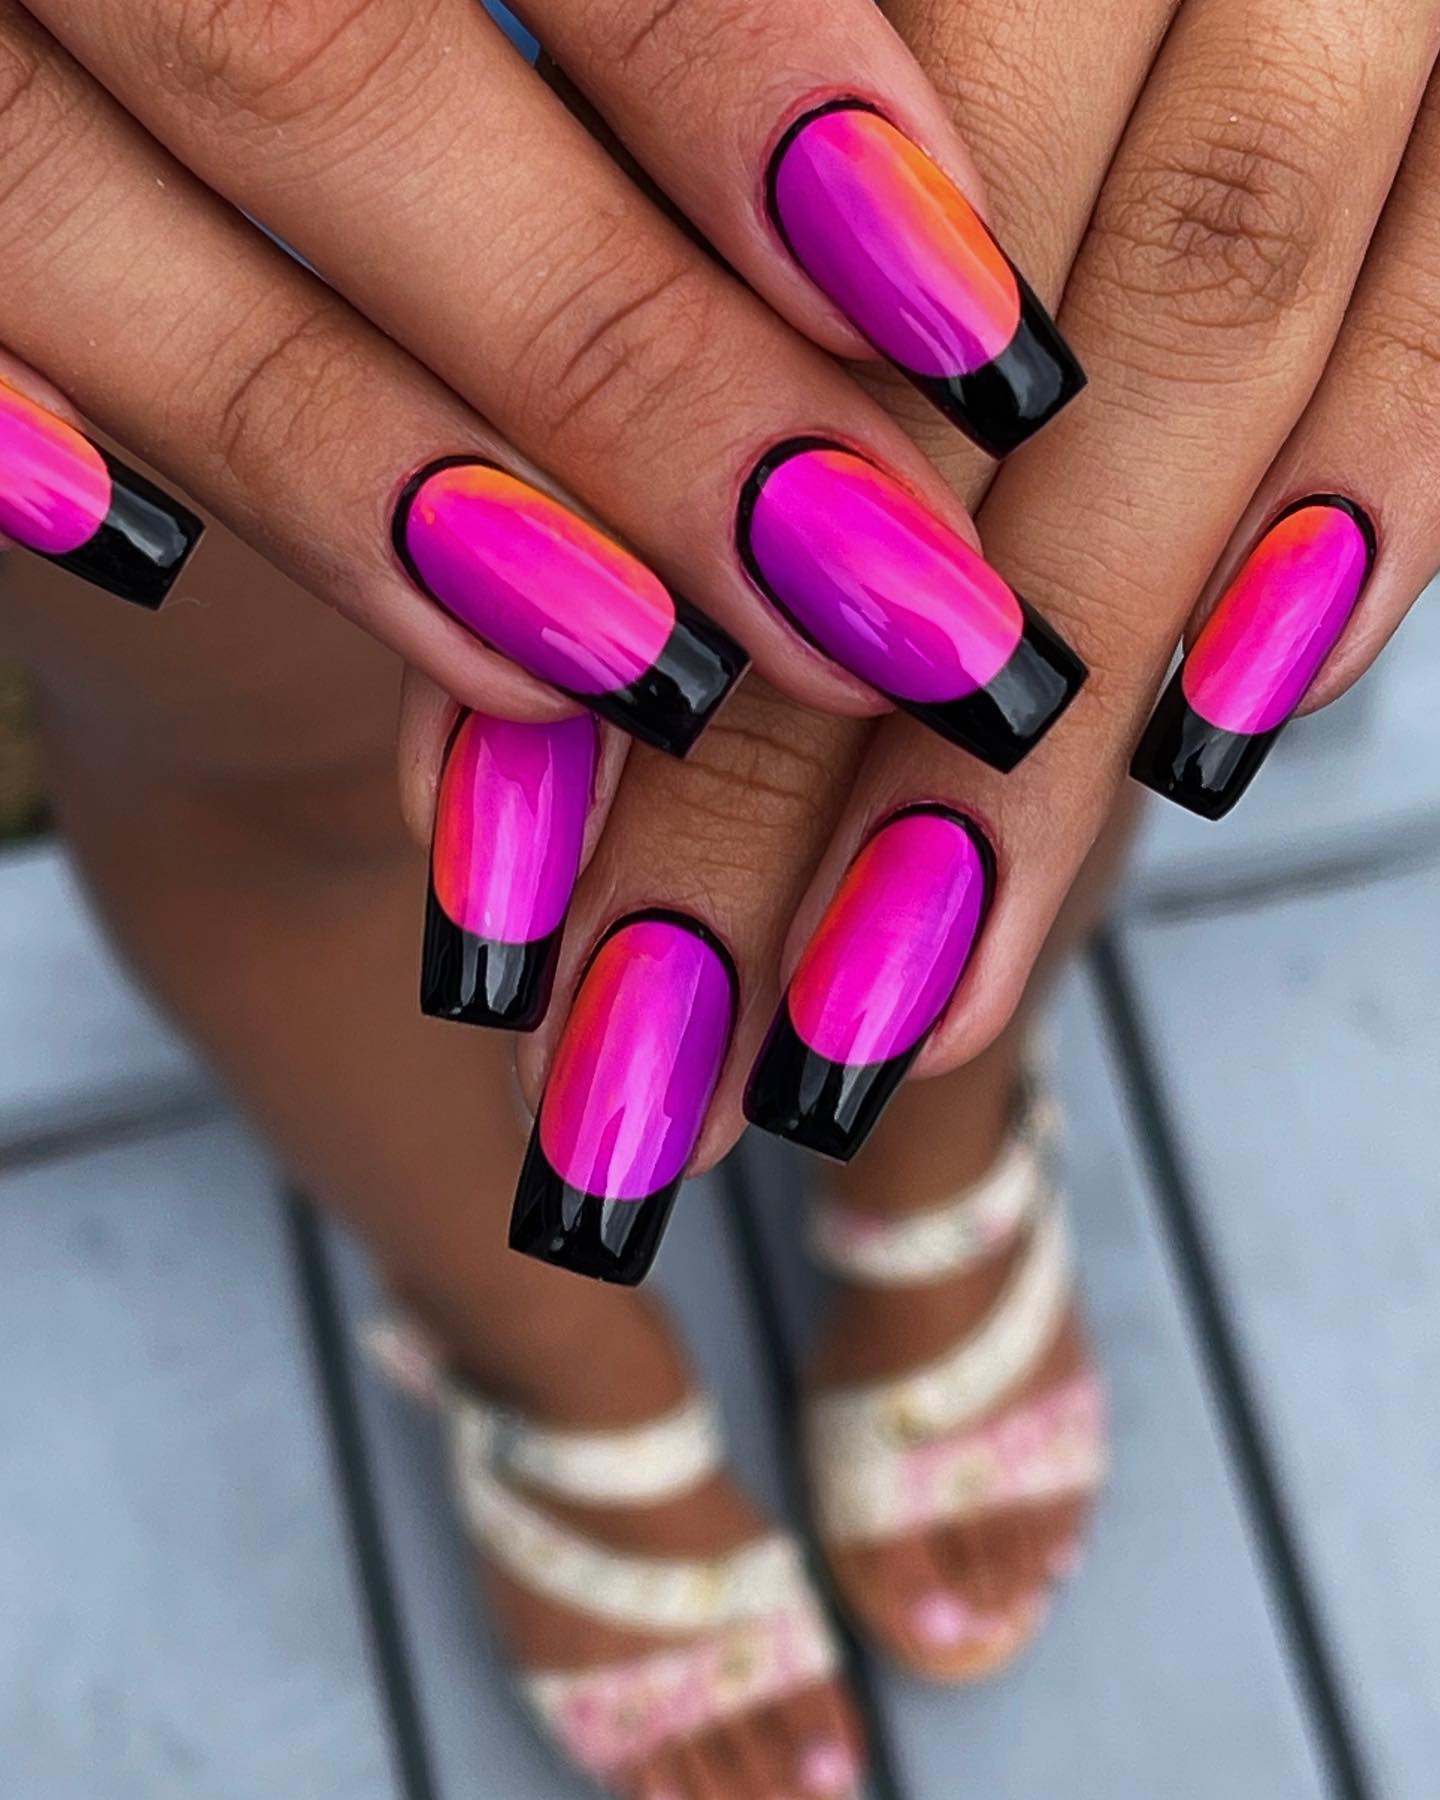 Have you ever seen a cooler framed nail design like this? Purple and orange shaded nails look amazing when they are framed with black.